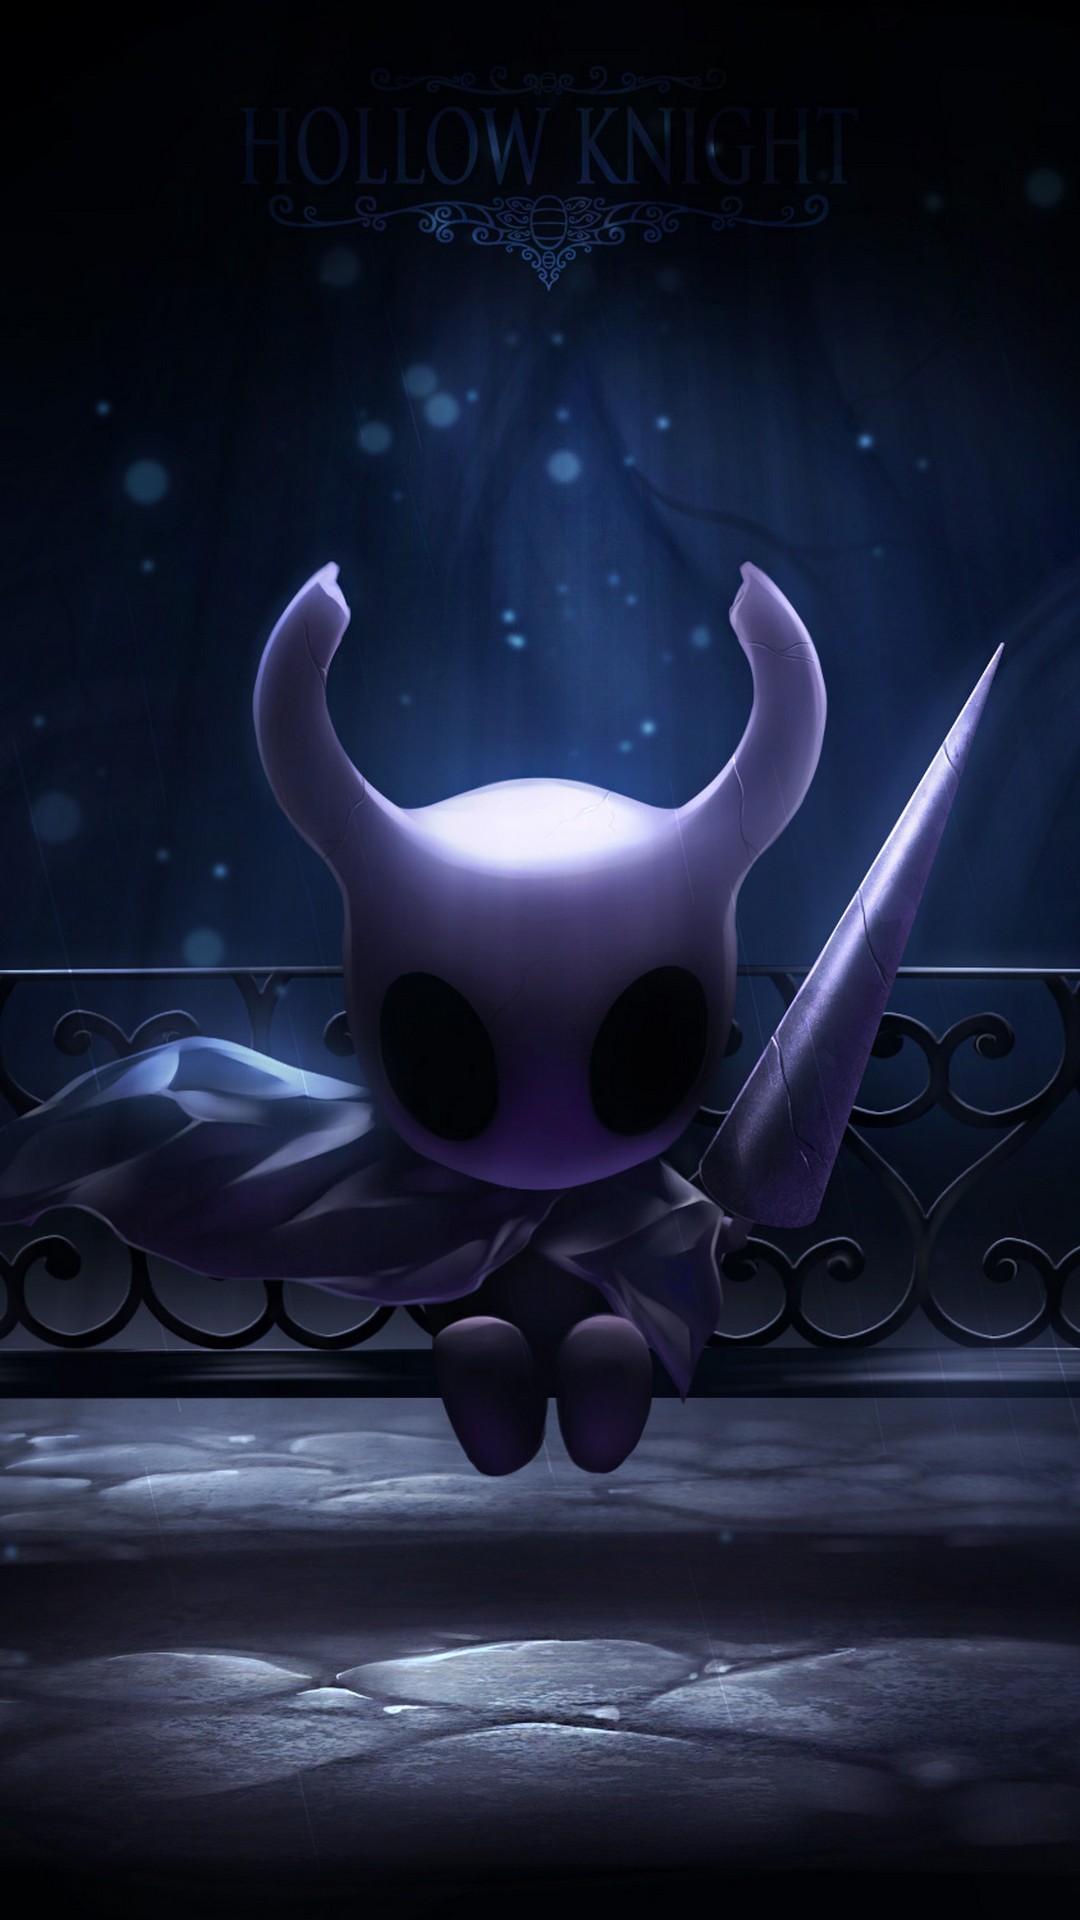 Hollow Knight HD Wallpapers For Android with high-resolution 1080x1920 pixel. You can use this wallpaper for your Android backgrounds, Tablet, Samsung Screensavers, Mobile Phone Lock Screen and another Smartphones device